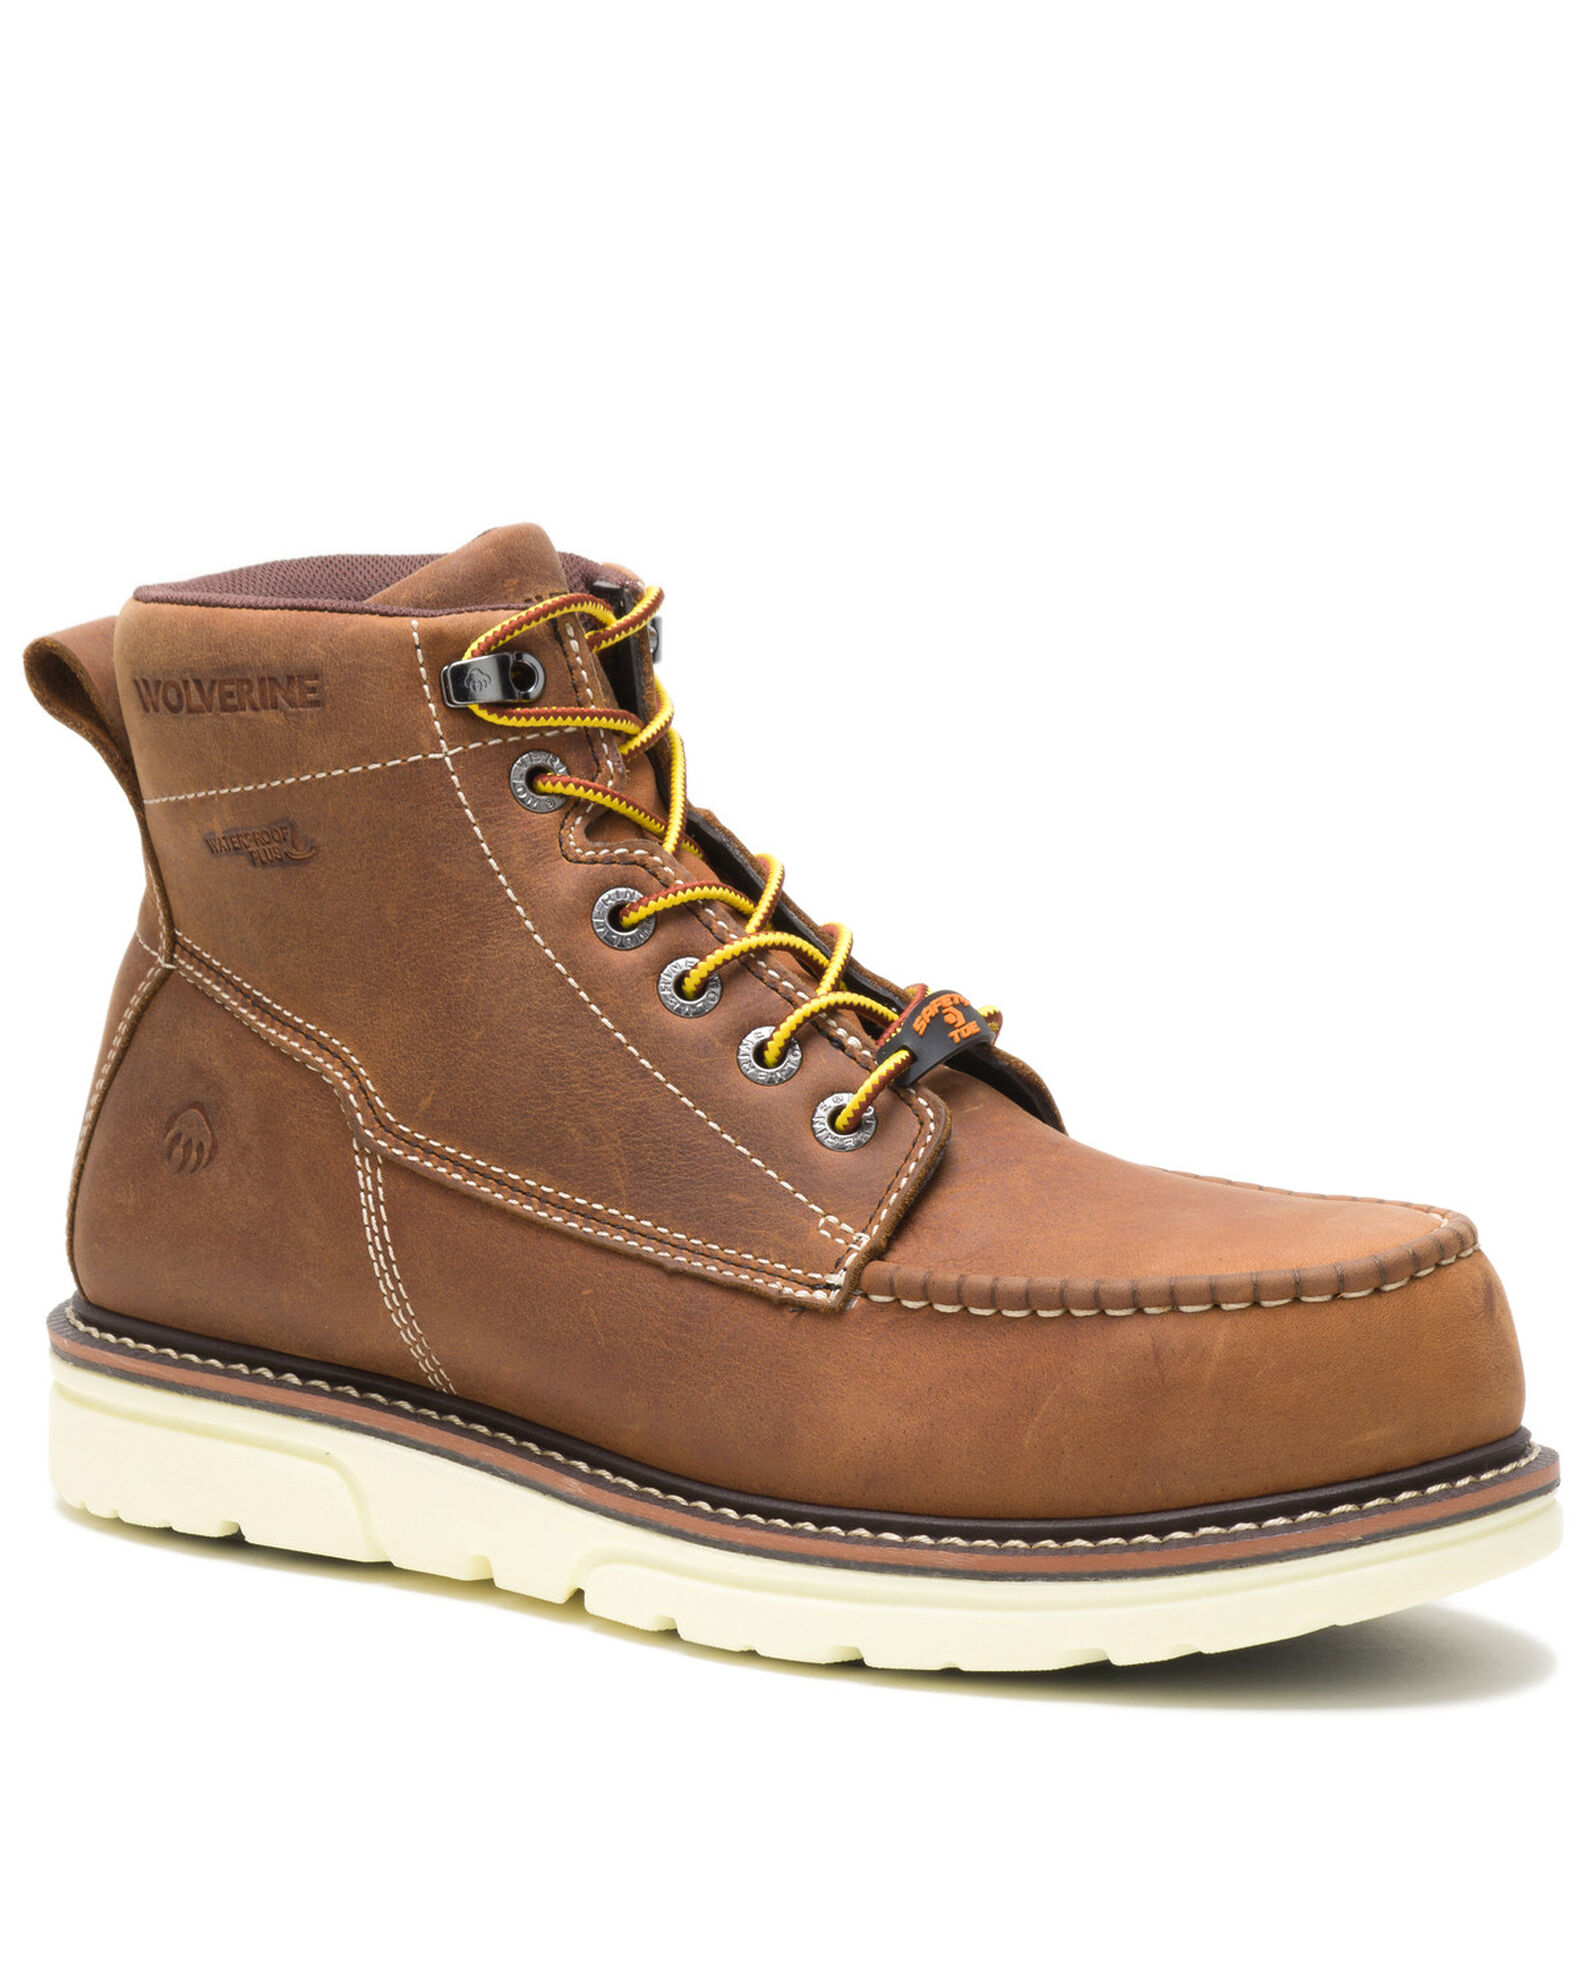 Wolverine Men's I-90 Work Boots Composite Toe | Boot